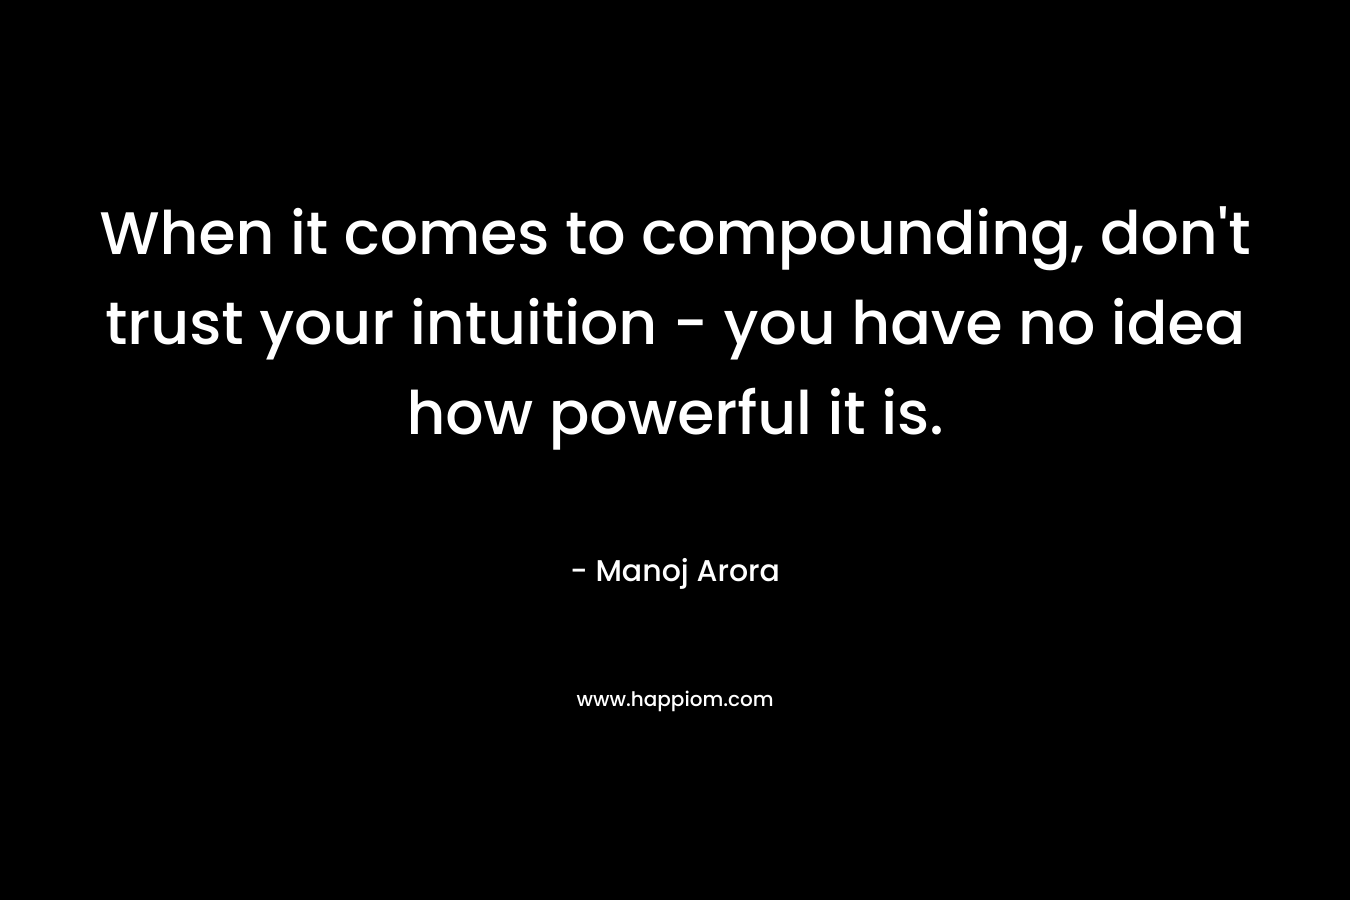 When it comes to compounding, don't trust your intuition - you have no idea how powerful it is.